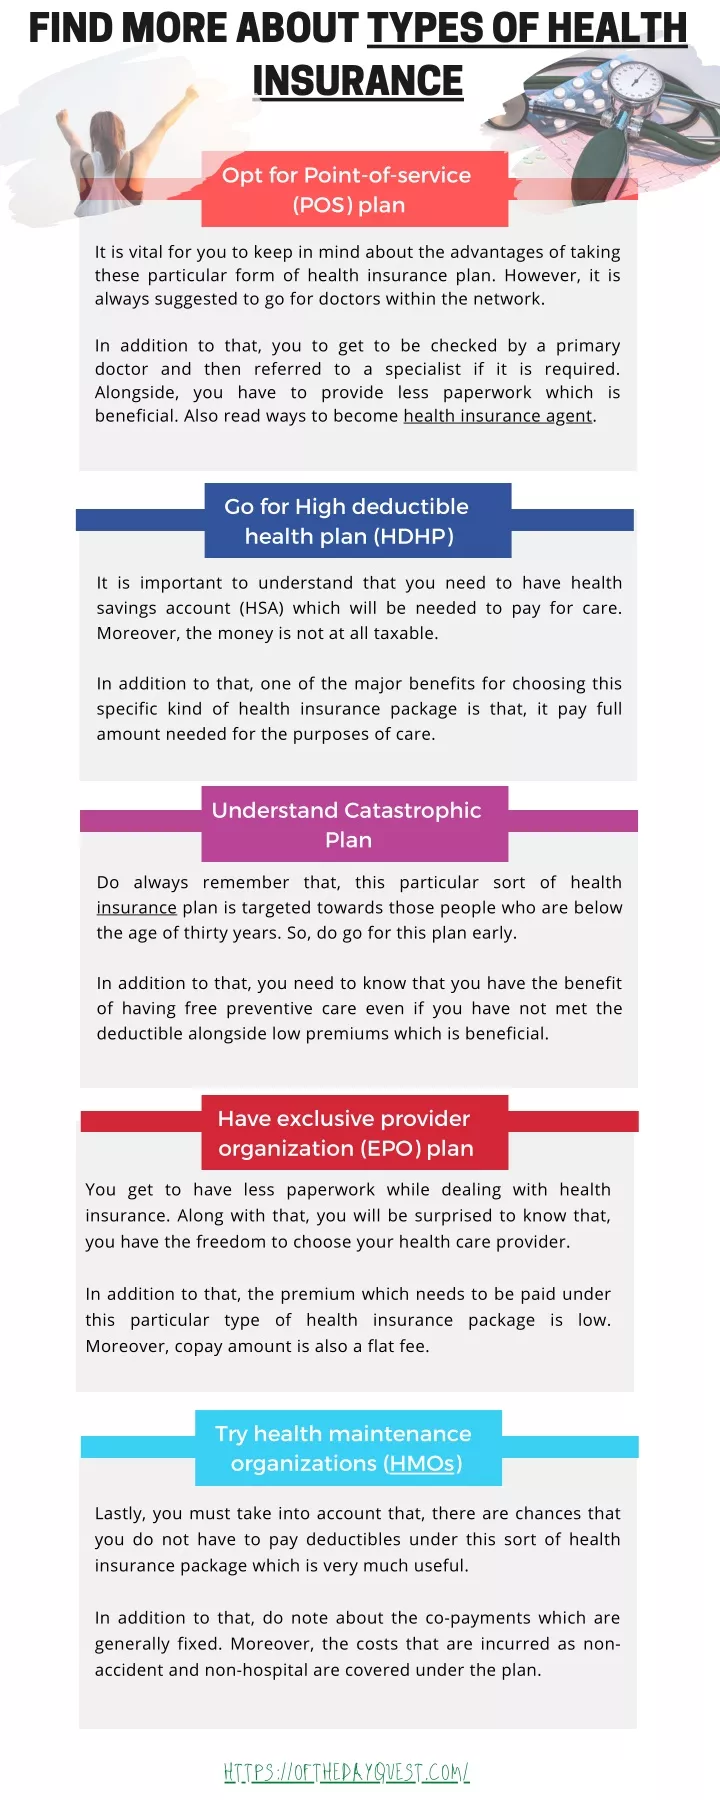 find more about types of health